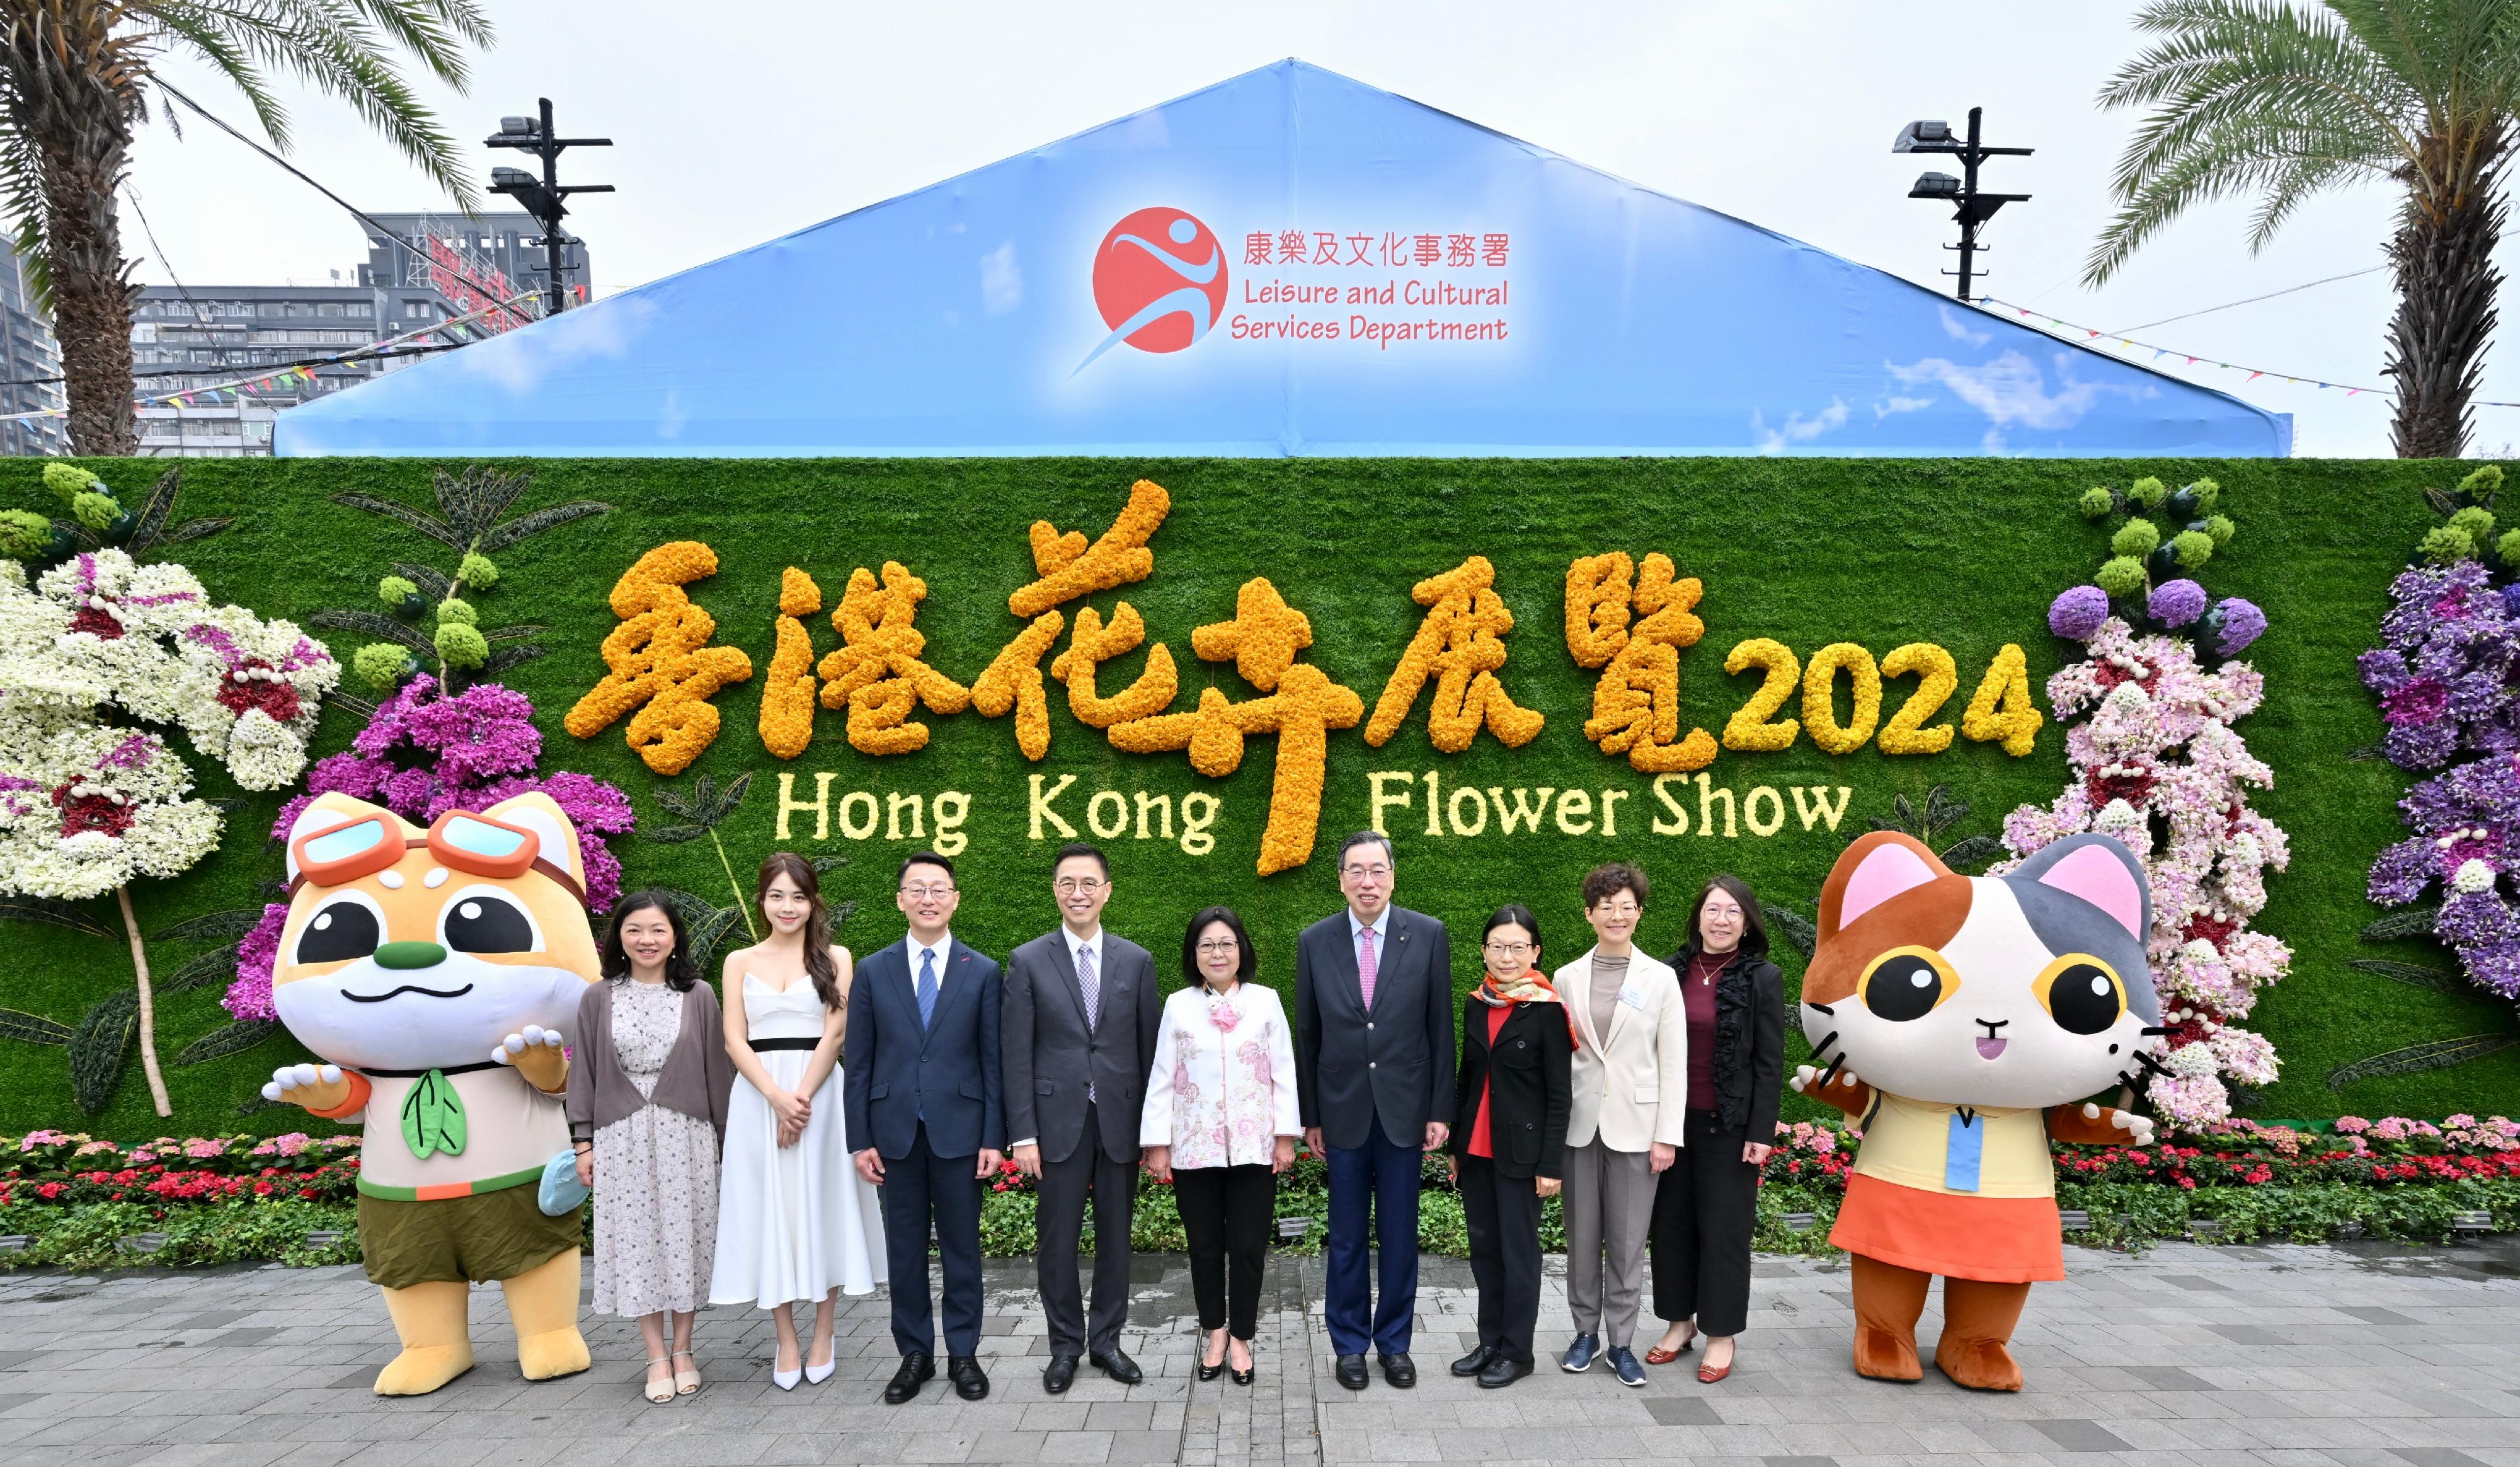 The annual Hong Kong Flower Show extravaganza opened at Victoria Park today (March 15) with some 420 000 flowers on display, including about 40 000 angelonias as the theme flower. Photo shows (from right) Assistant Director (Leisure Services) of the Leisure and Cultural Services Department (LCSD) Ms Fung Miu-ling; Deputy Director (Leisure Services) of the LCSD Ms Winnie Chui; Steward of the Hong Kong Jockey Club, Miss Anita Fung; the President of the Legislative Council, Mr Andrew Leung; the wife of the Chief Executive, Mrs Janet Lee; the Secretary for Culture, Sports and Tourism, Mr Kevin Yeung; the Director of Leisure and Cultural Services, Mr Vincent Liu; Miss Hong Kong 2023 Hilary Chong; and the Chairperson of the Show Committee of the Flower Show, Ms Tina Tai, in front of the three-dimensional angelonia flower wall.